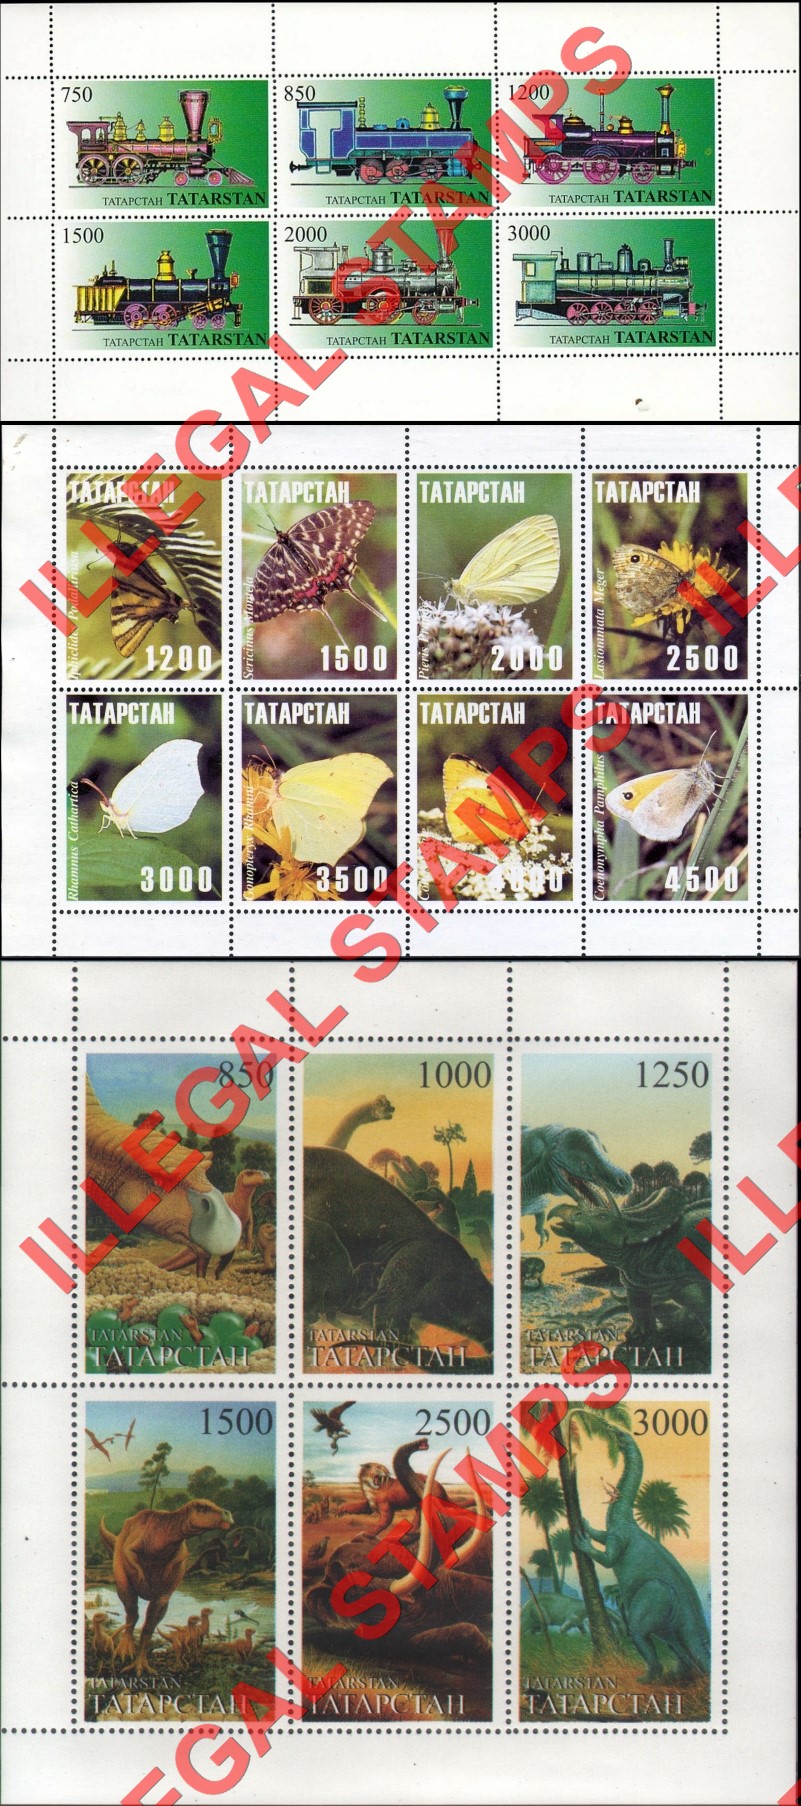 Republic of Tatarstan 1997 Counterfeit Illegal Stamps (Part 1)